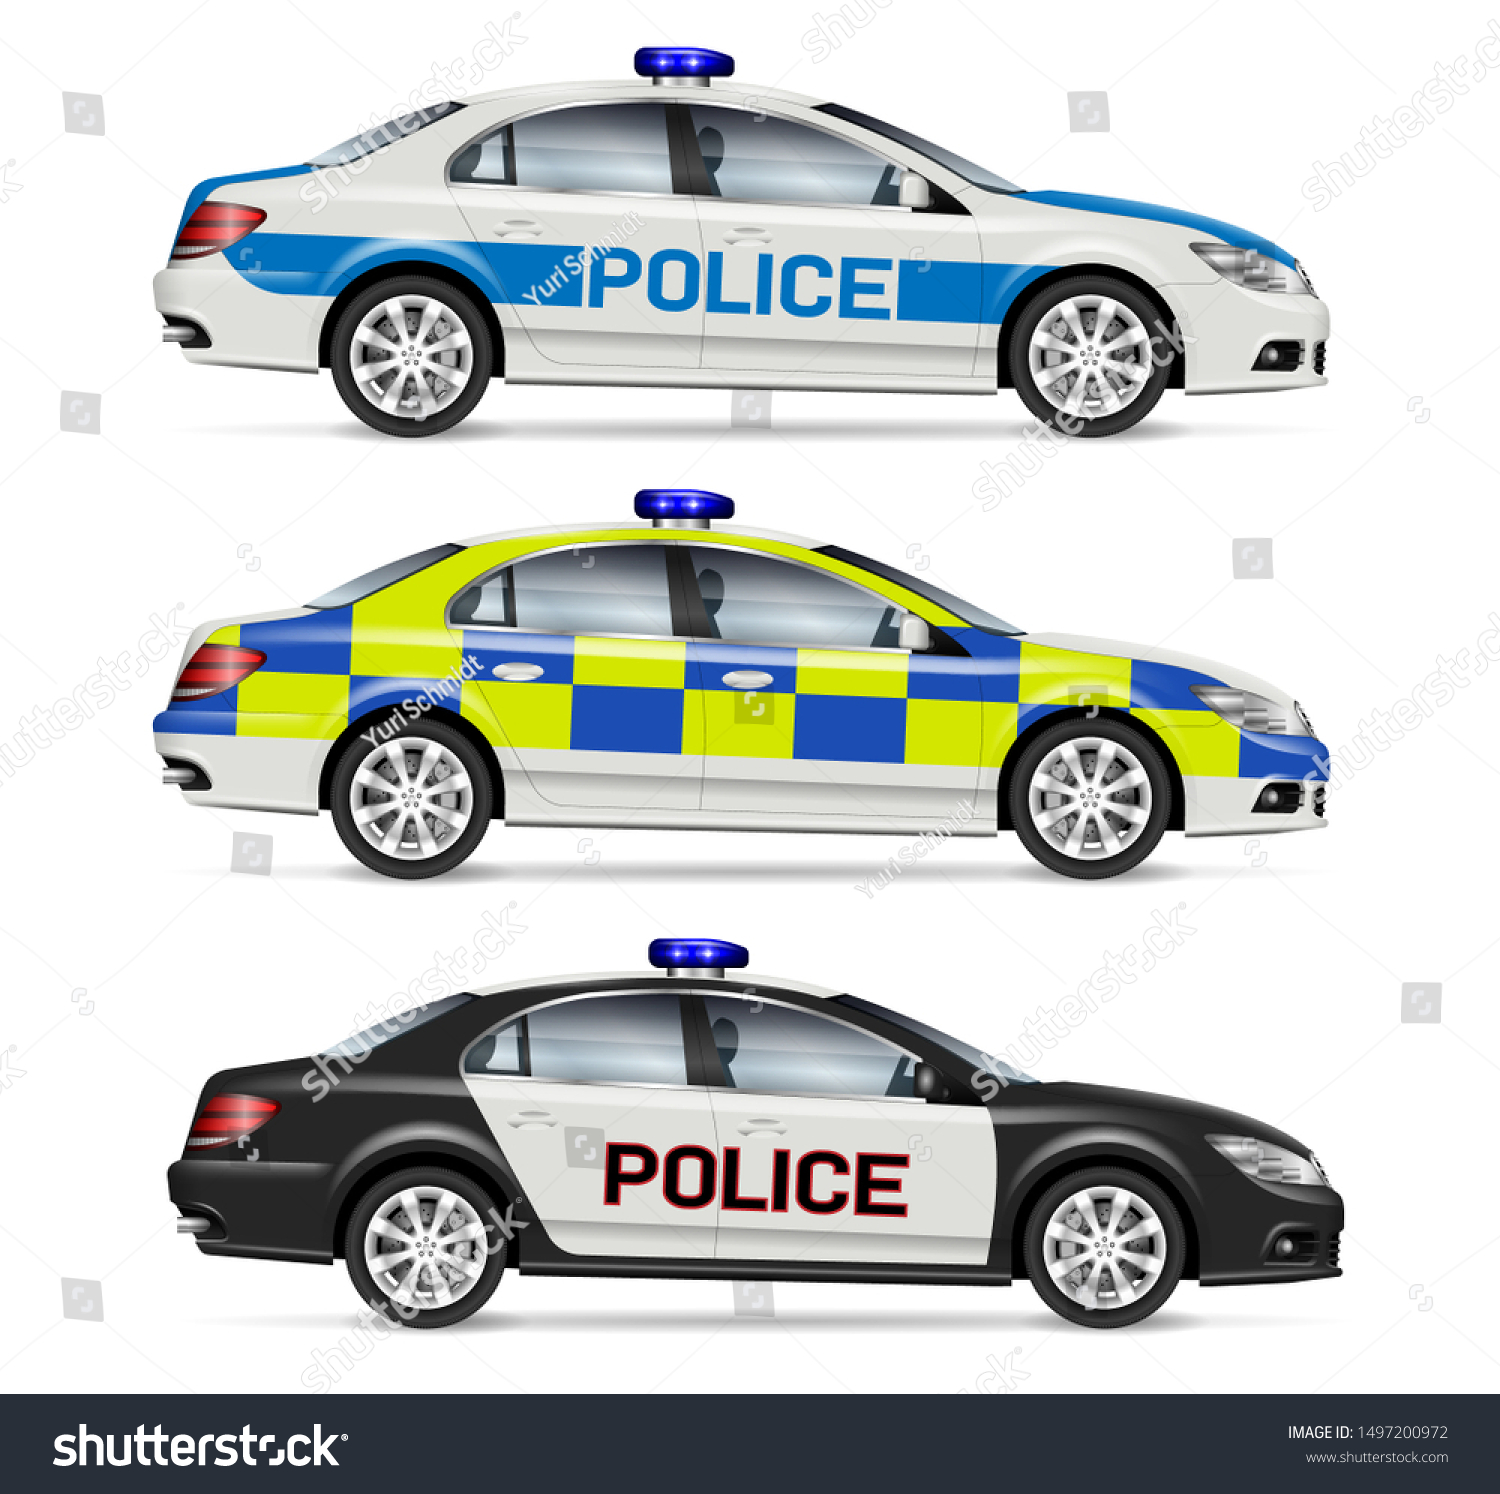 SVG of Police cars side view vector illustration isolated on white background. All elements in the groups on separate layers for easy editing and recolor svg